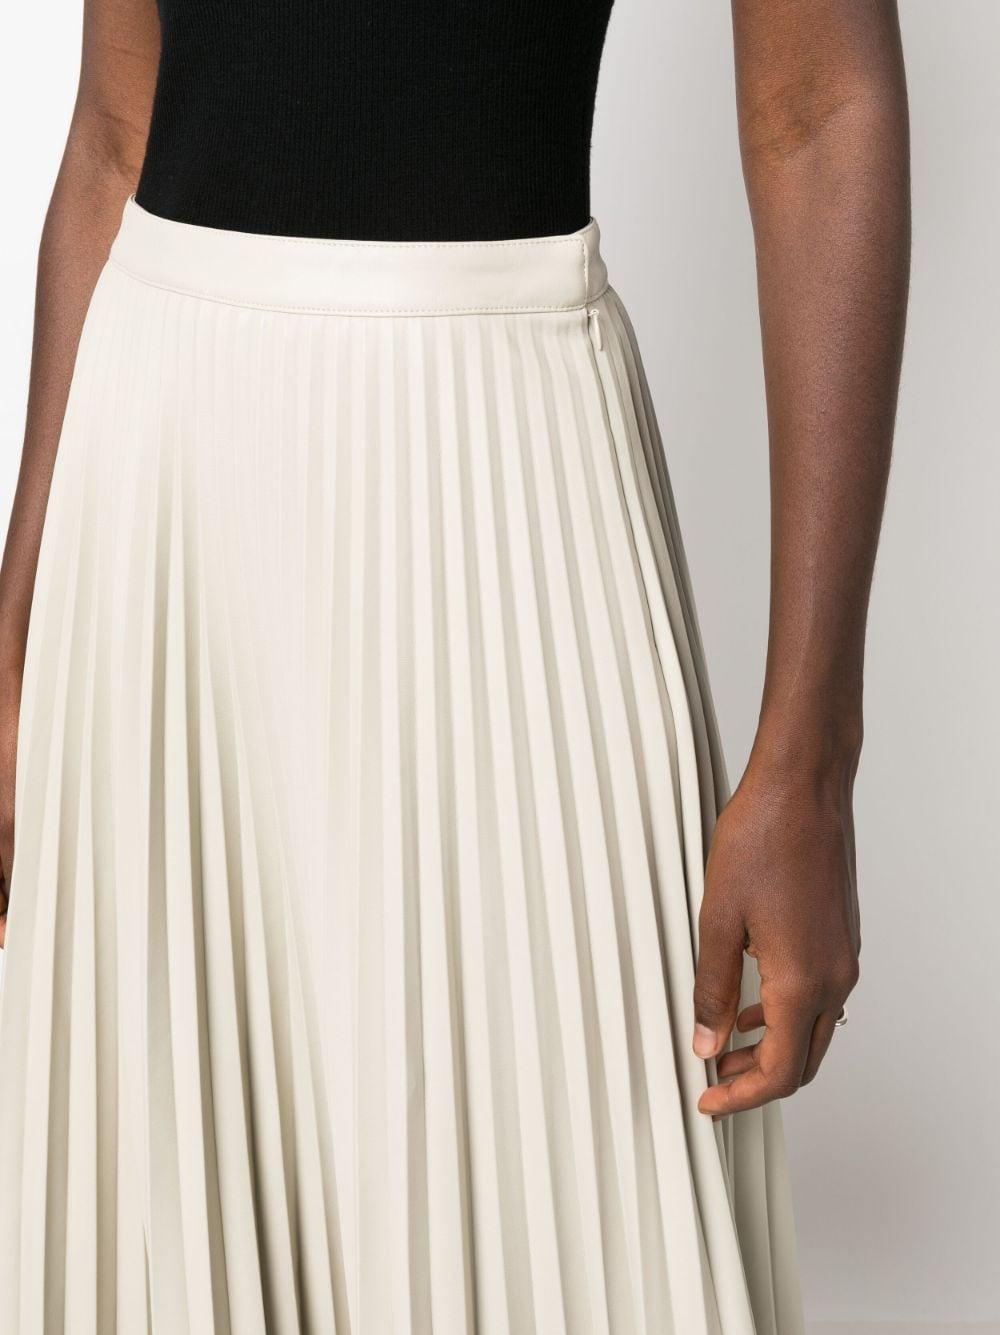 PROENZA SCHOULER WHITE LABEL High-waisted Pleated Skirt in Natural | Lyst